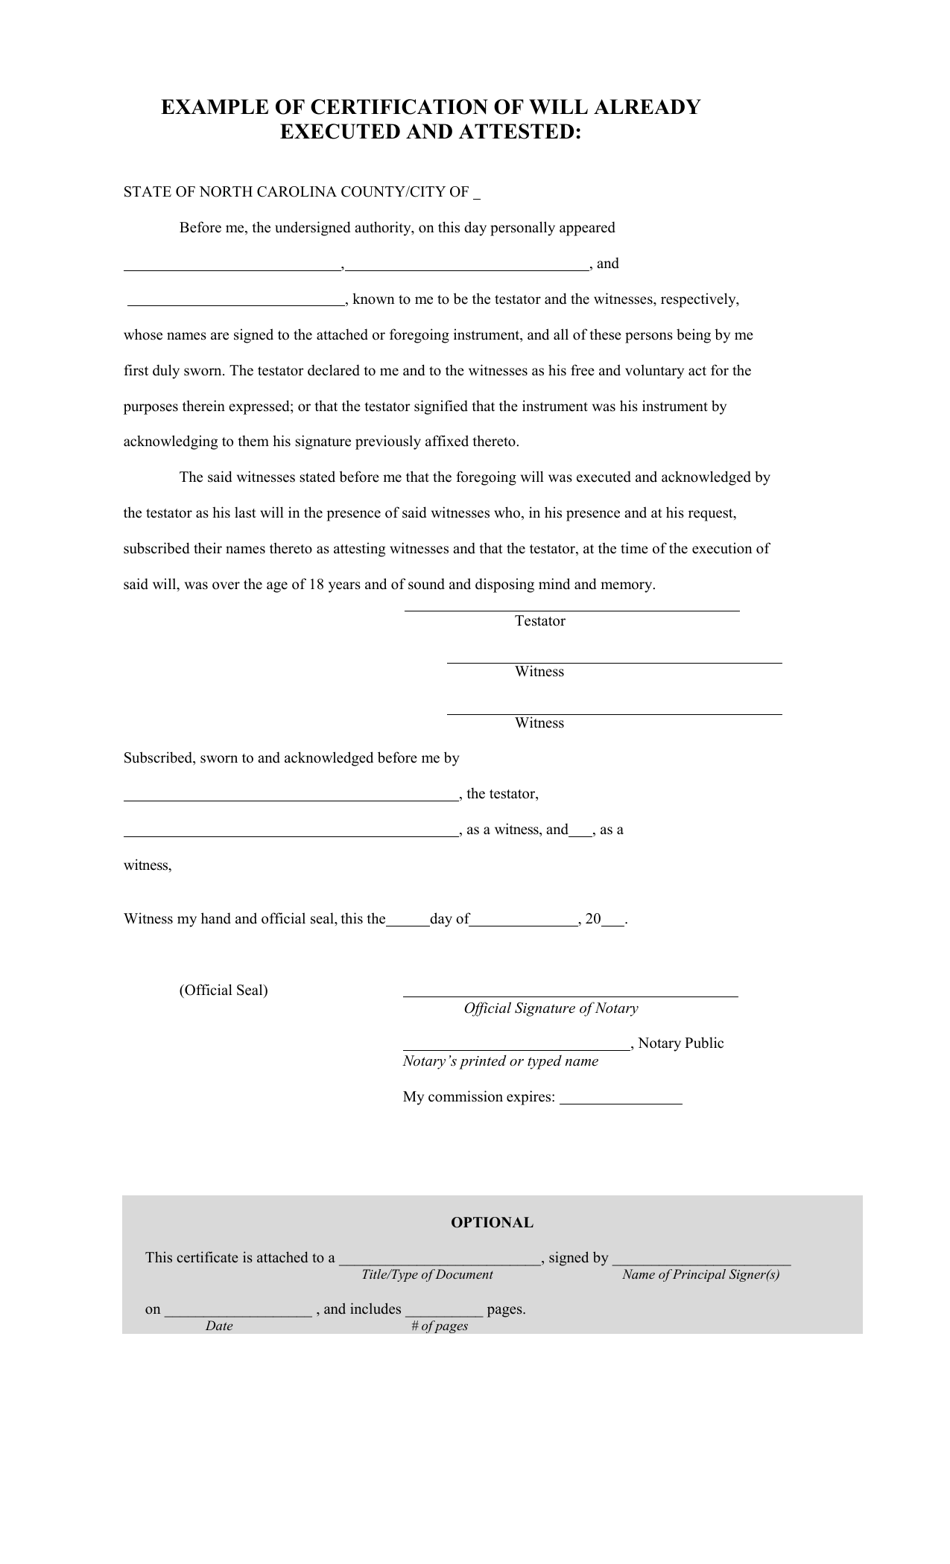 Certification of Will Already Executed and Attested - North Carolina, Page 1